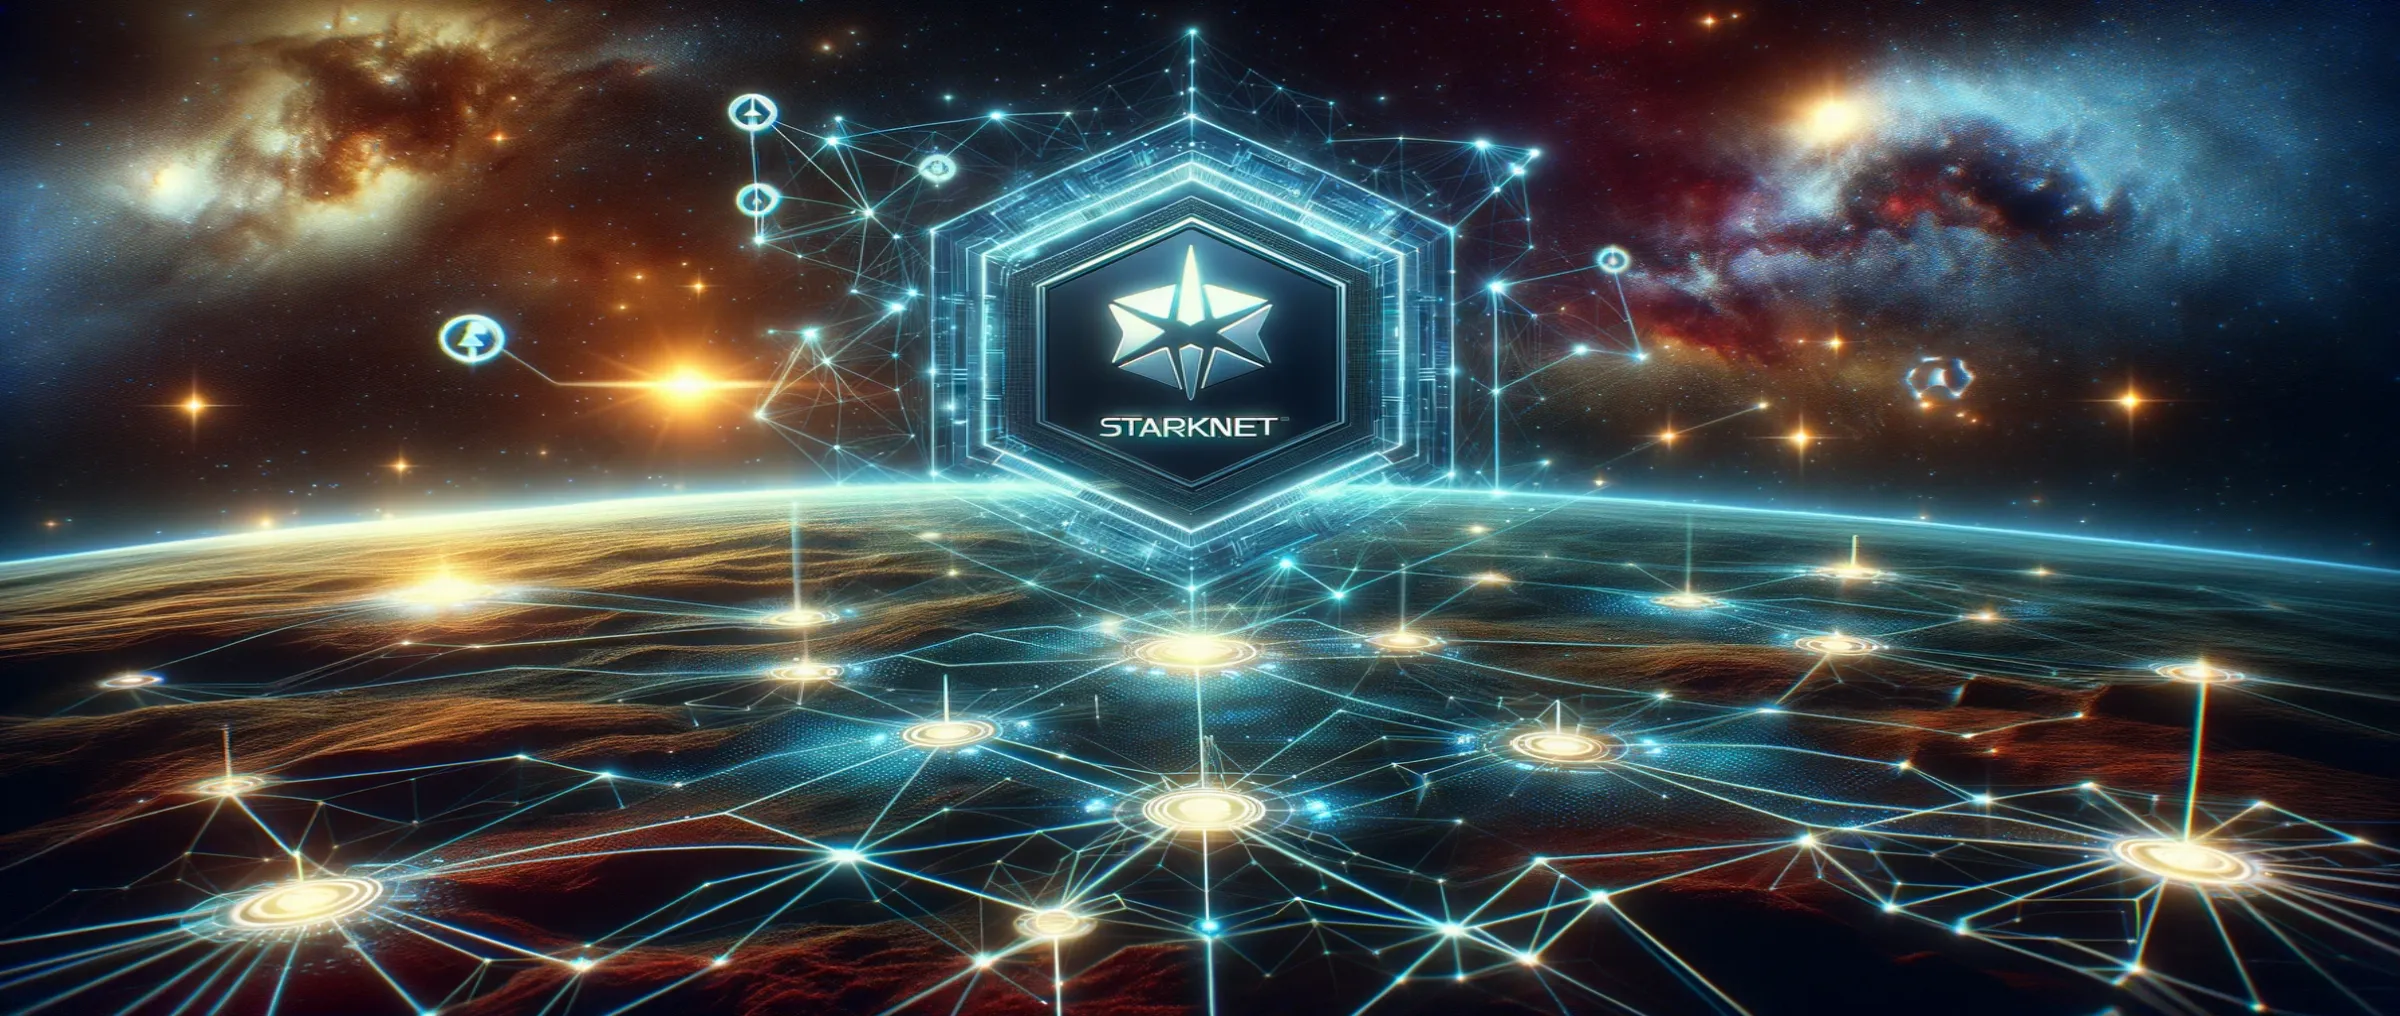 The Starknet team has set a date for updating the main network